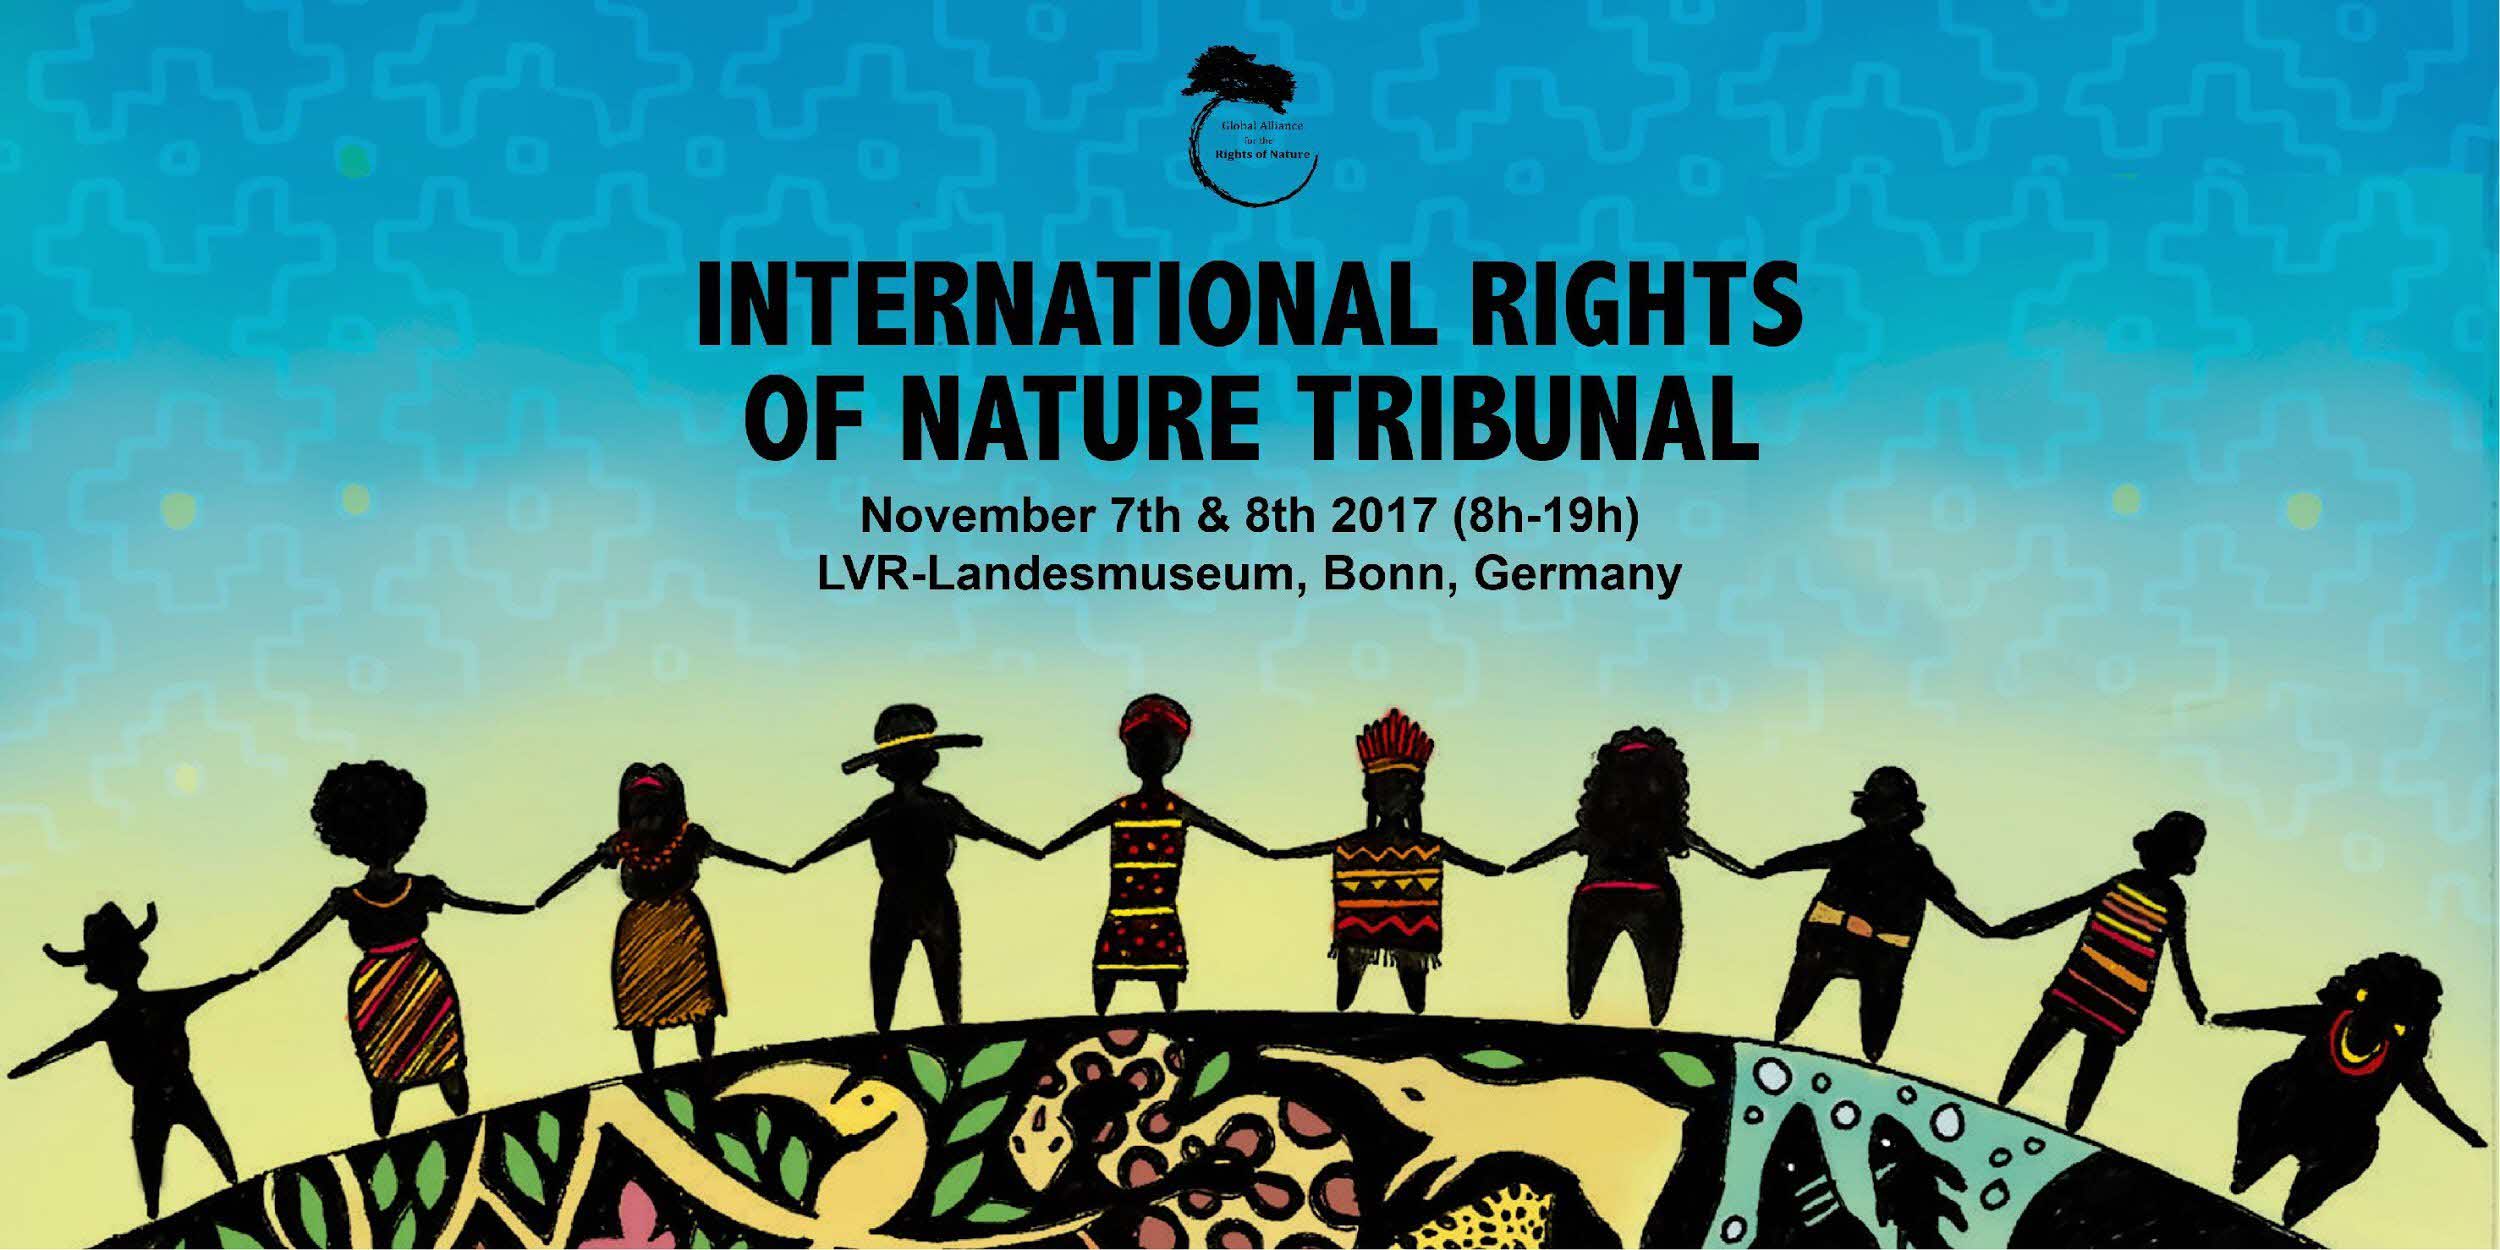 International Rights of Nature Tribunal in Bonn Findings